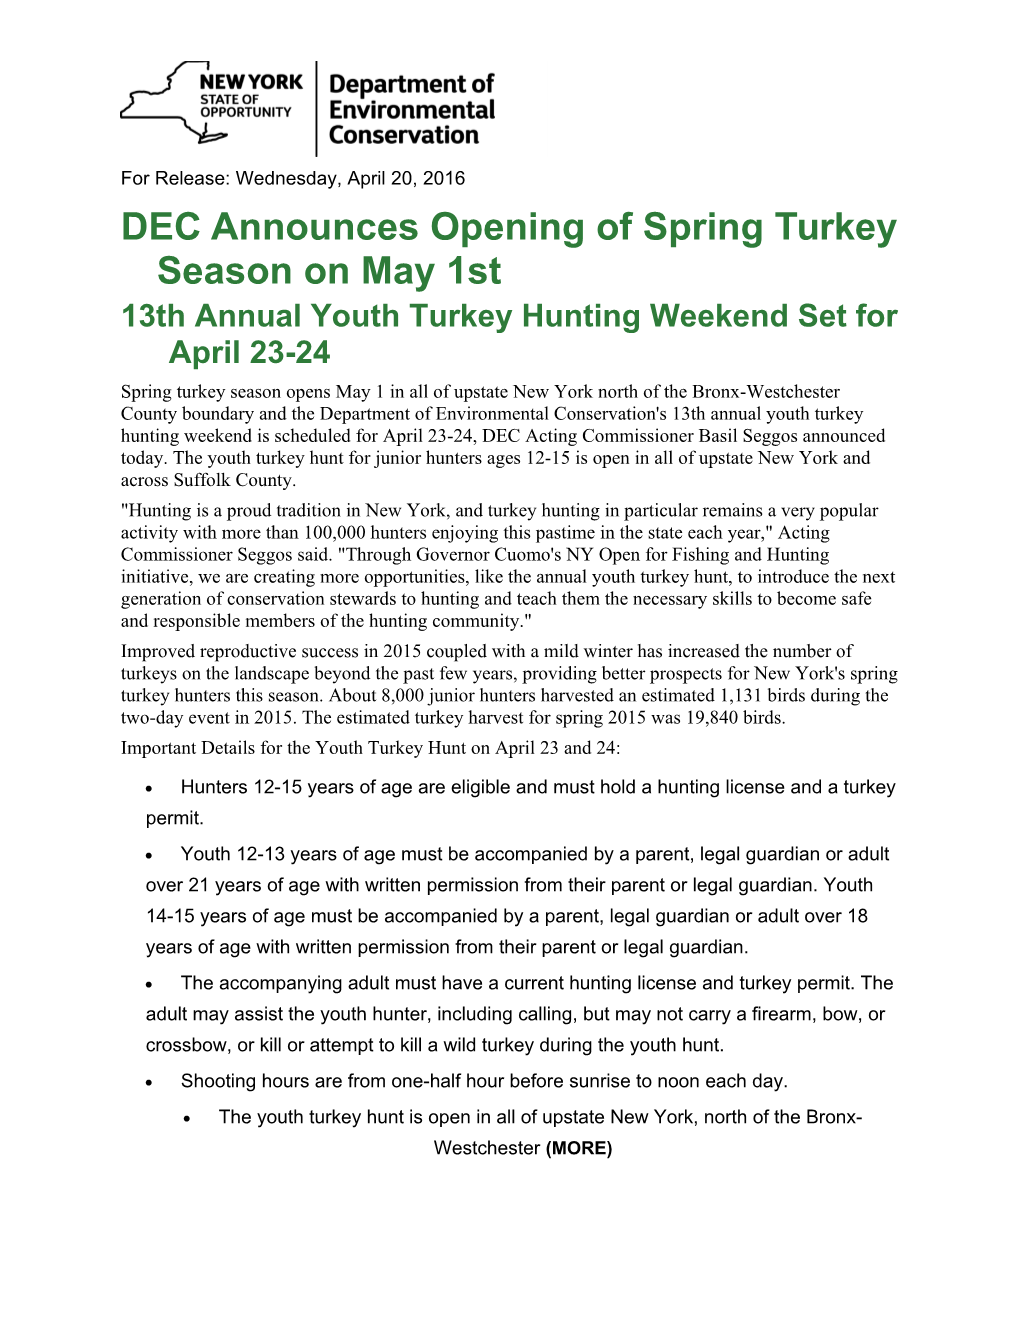 DEC Announces Opening of Spring Turkey Season on May 1St